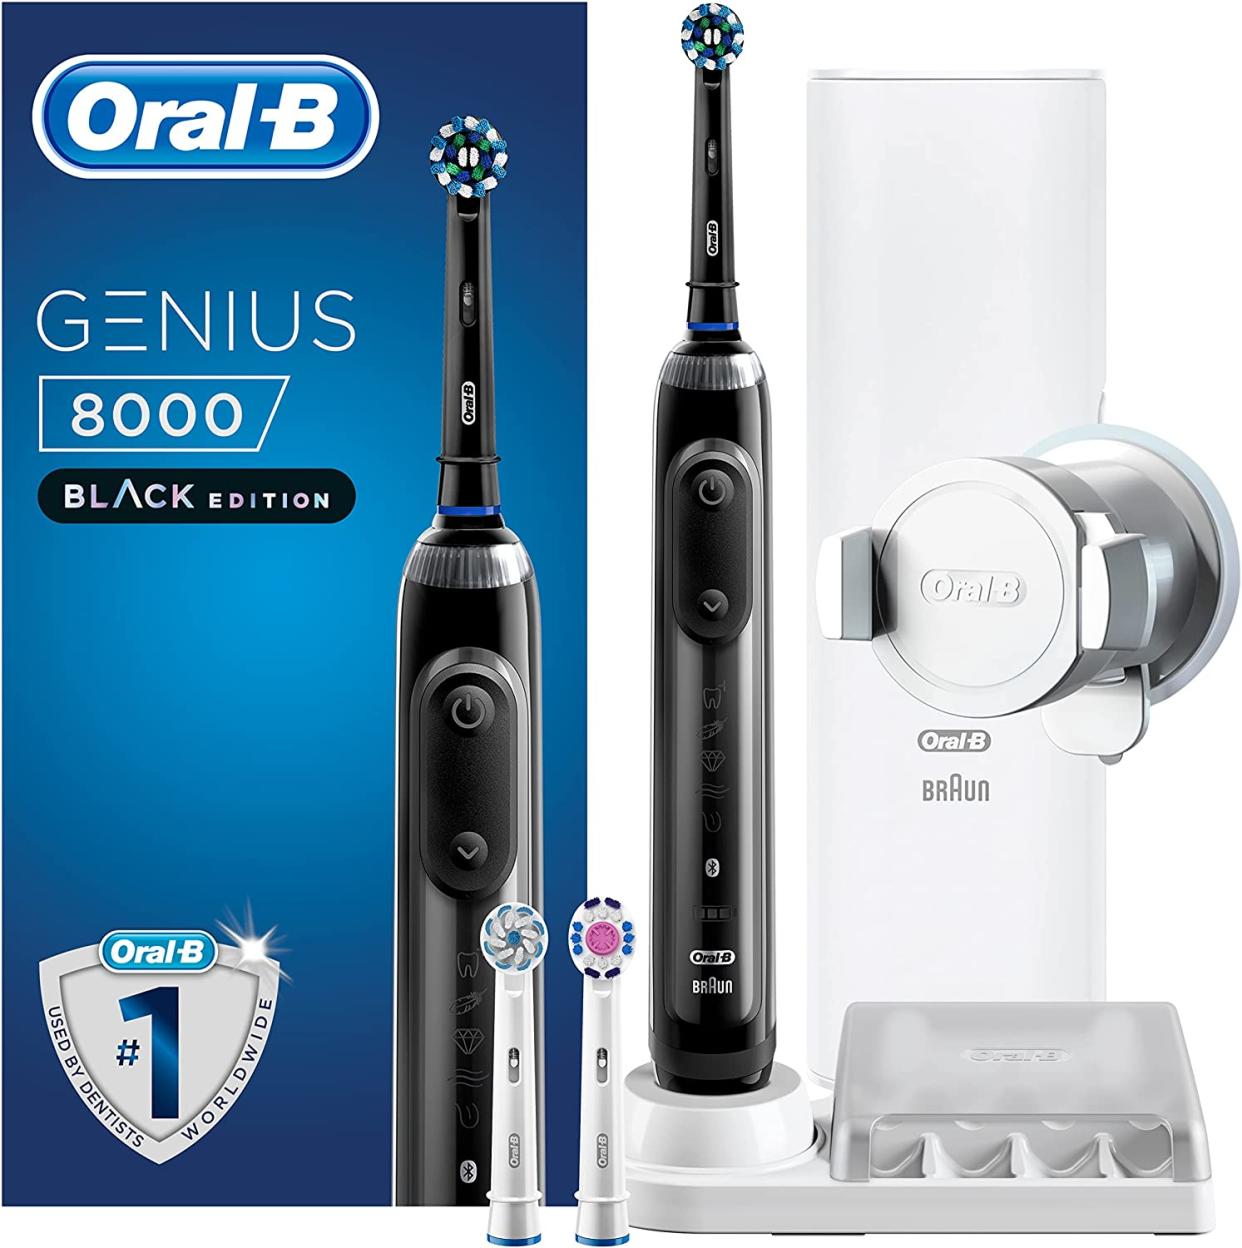 The Oral B Genius 8000 smart toothbrush features Artificial Intelligence, App Connected Handle, 3 Toothbrush Heads and 5-Mode Display with Teeth Whitening. (Oral B/Amazon)